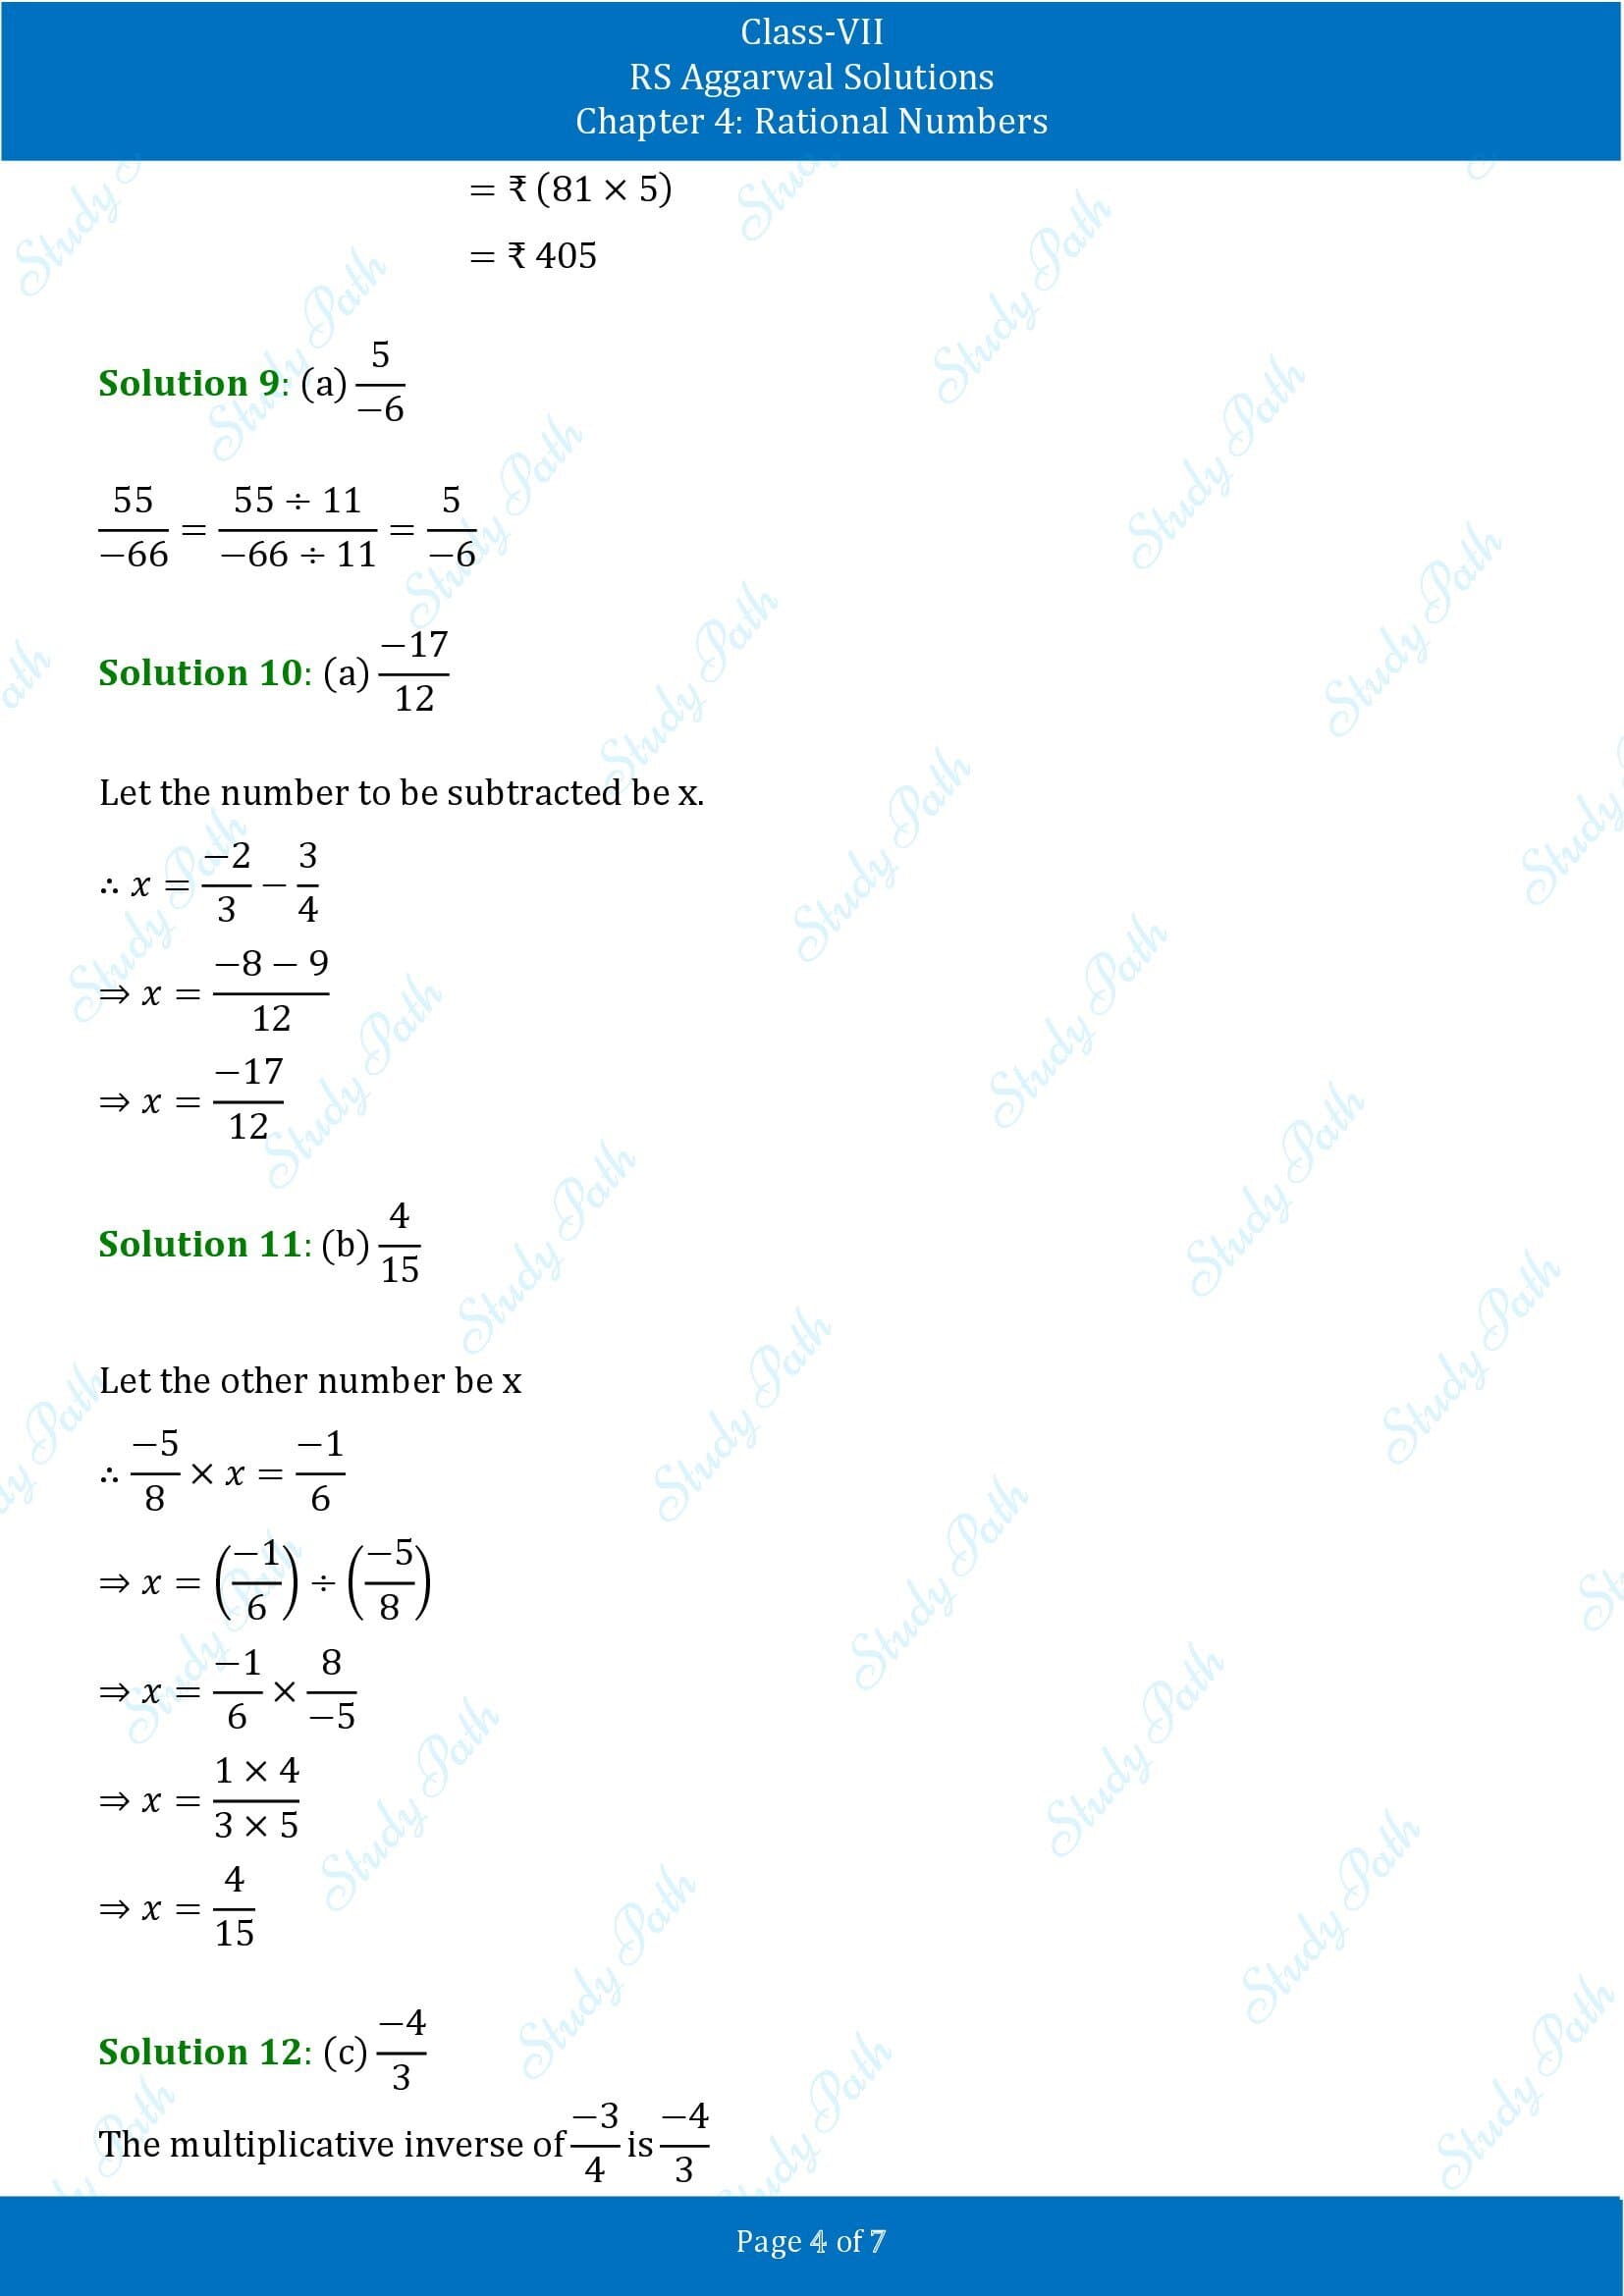 RS Aggarwal Solutions Class 7 Chapter 4 Rational Numbers Test Paper 00004